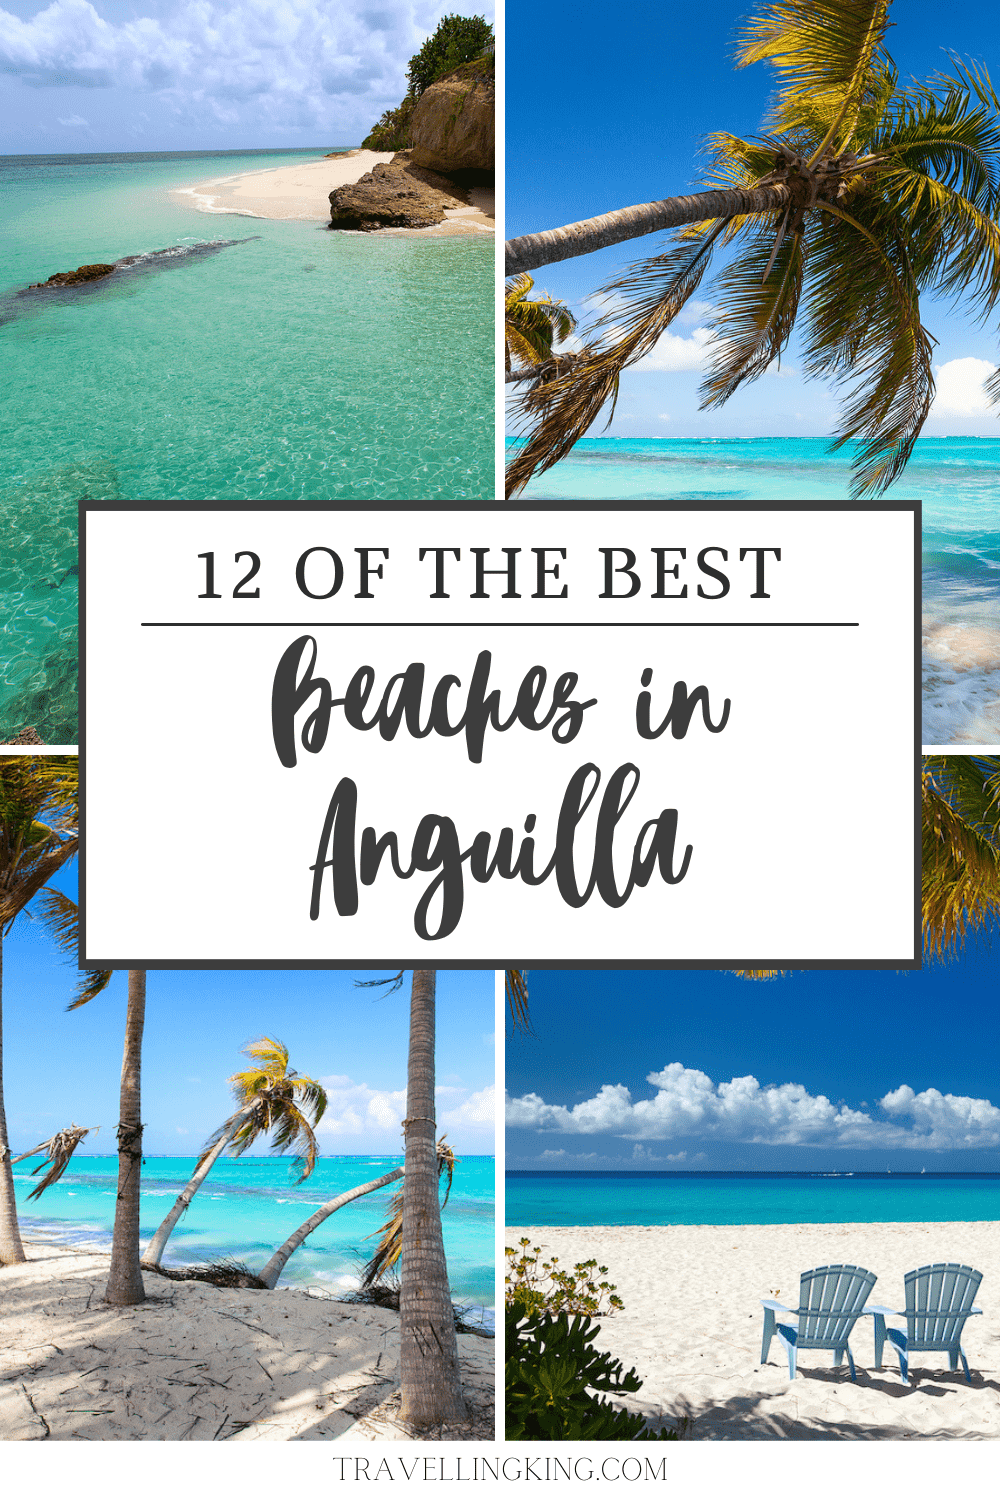 12 of the Best beaches in Anguilla